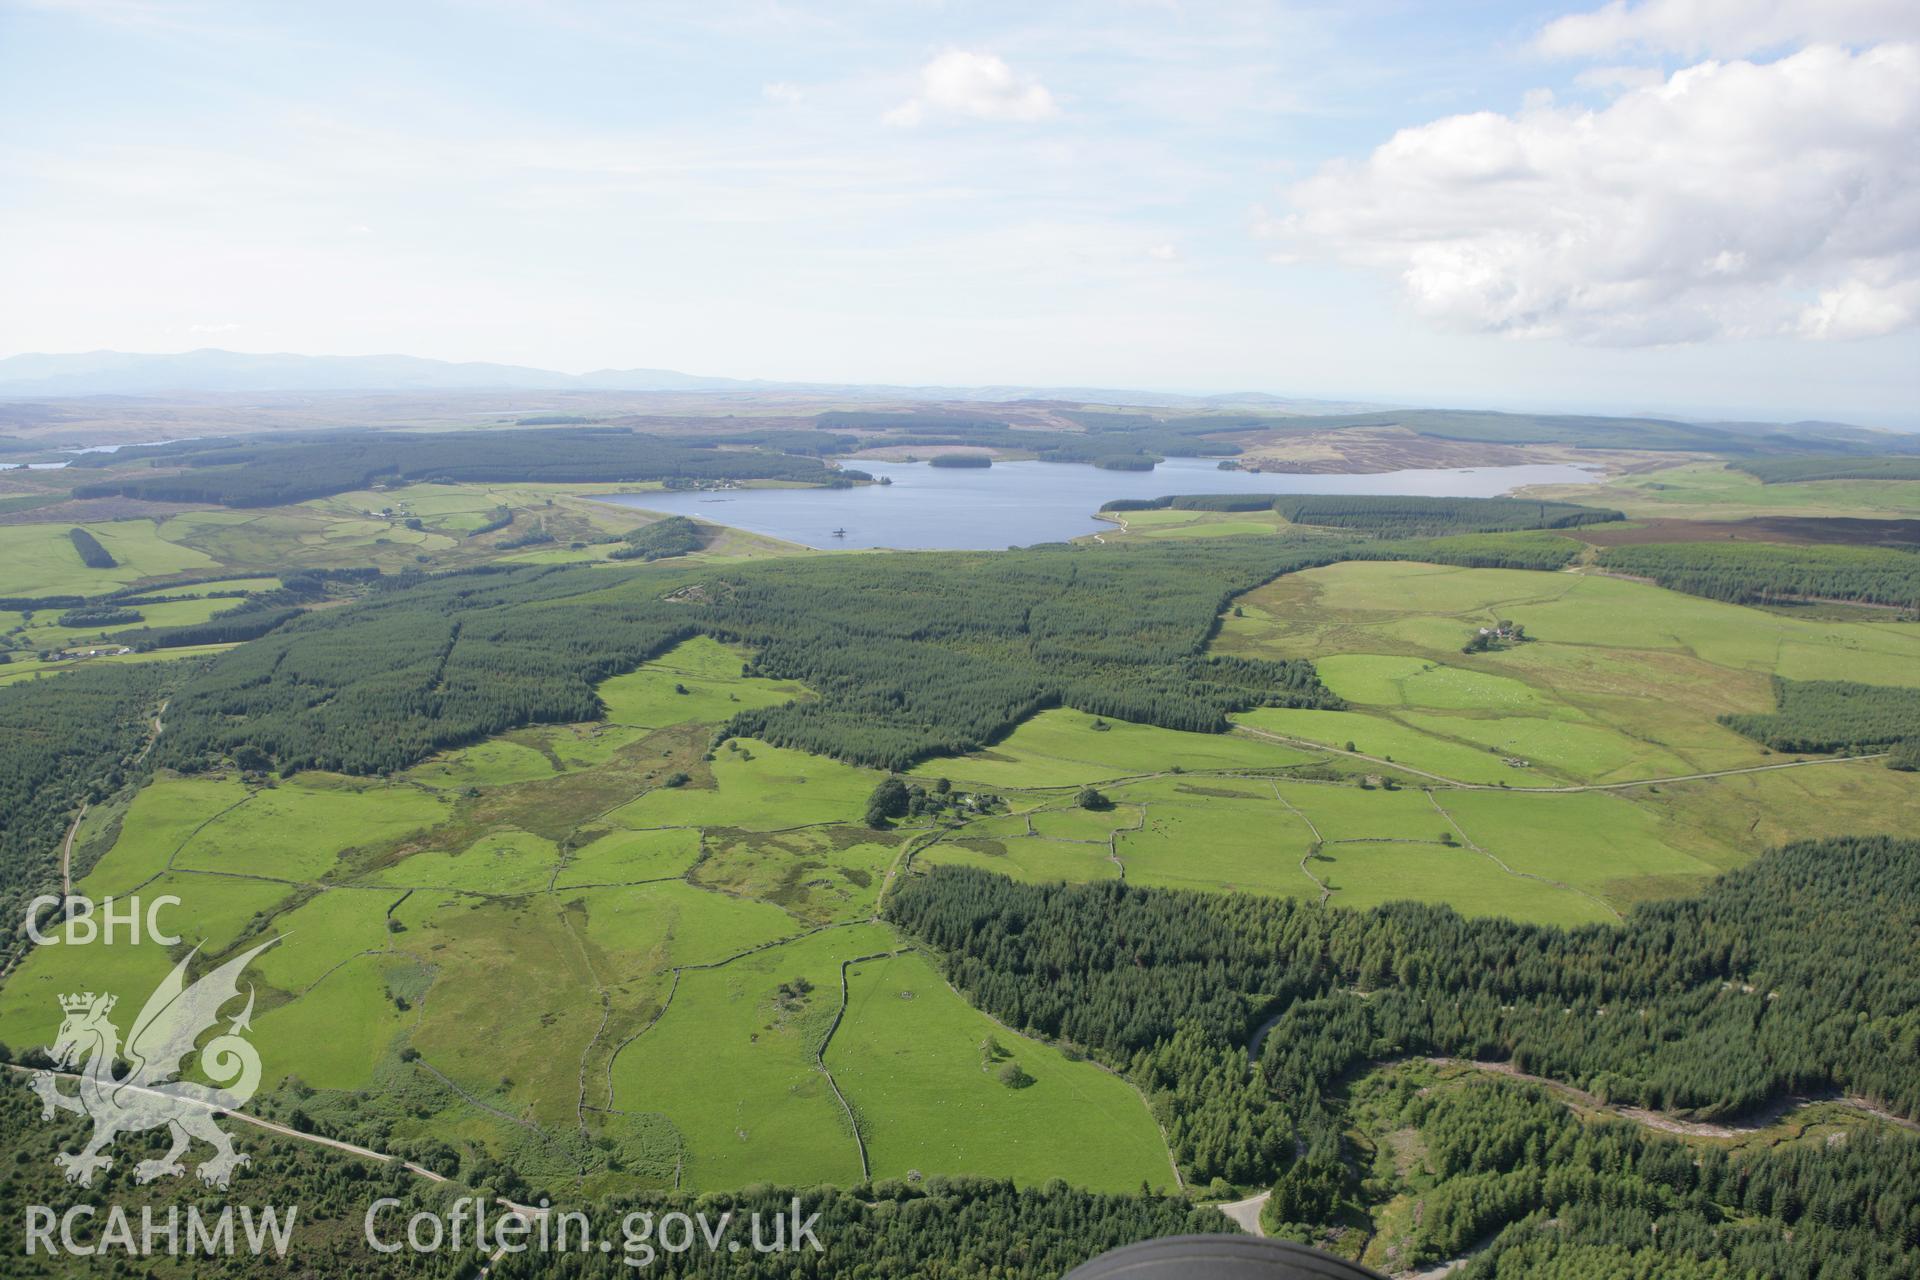 RCAHMW colour oblique aerial photograph showing distant landscape of Llyn Brenig from the south-east. Taken on 31 July 2007 by Toby Driver